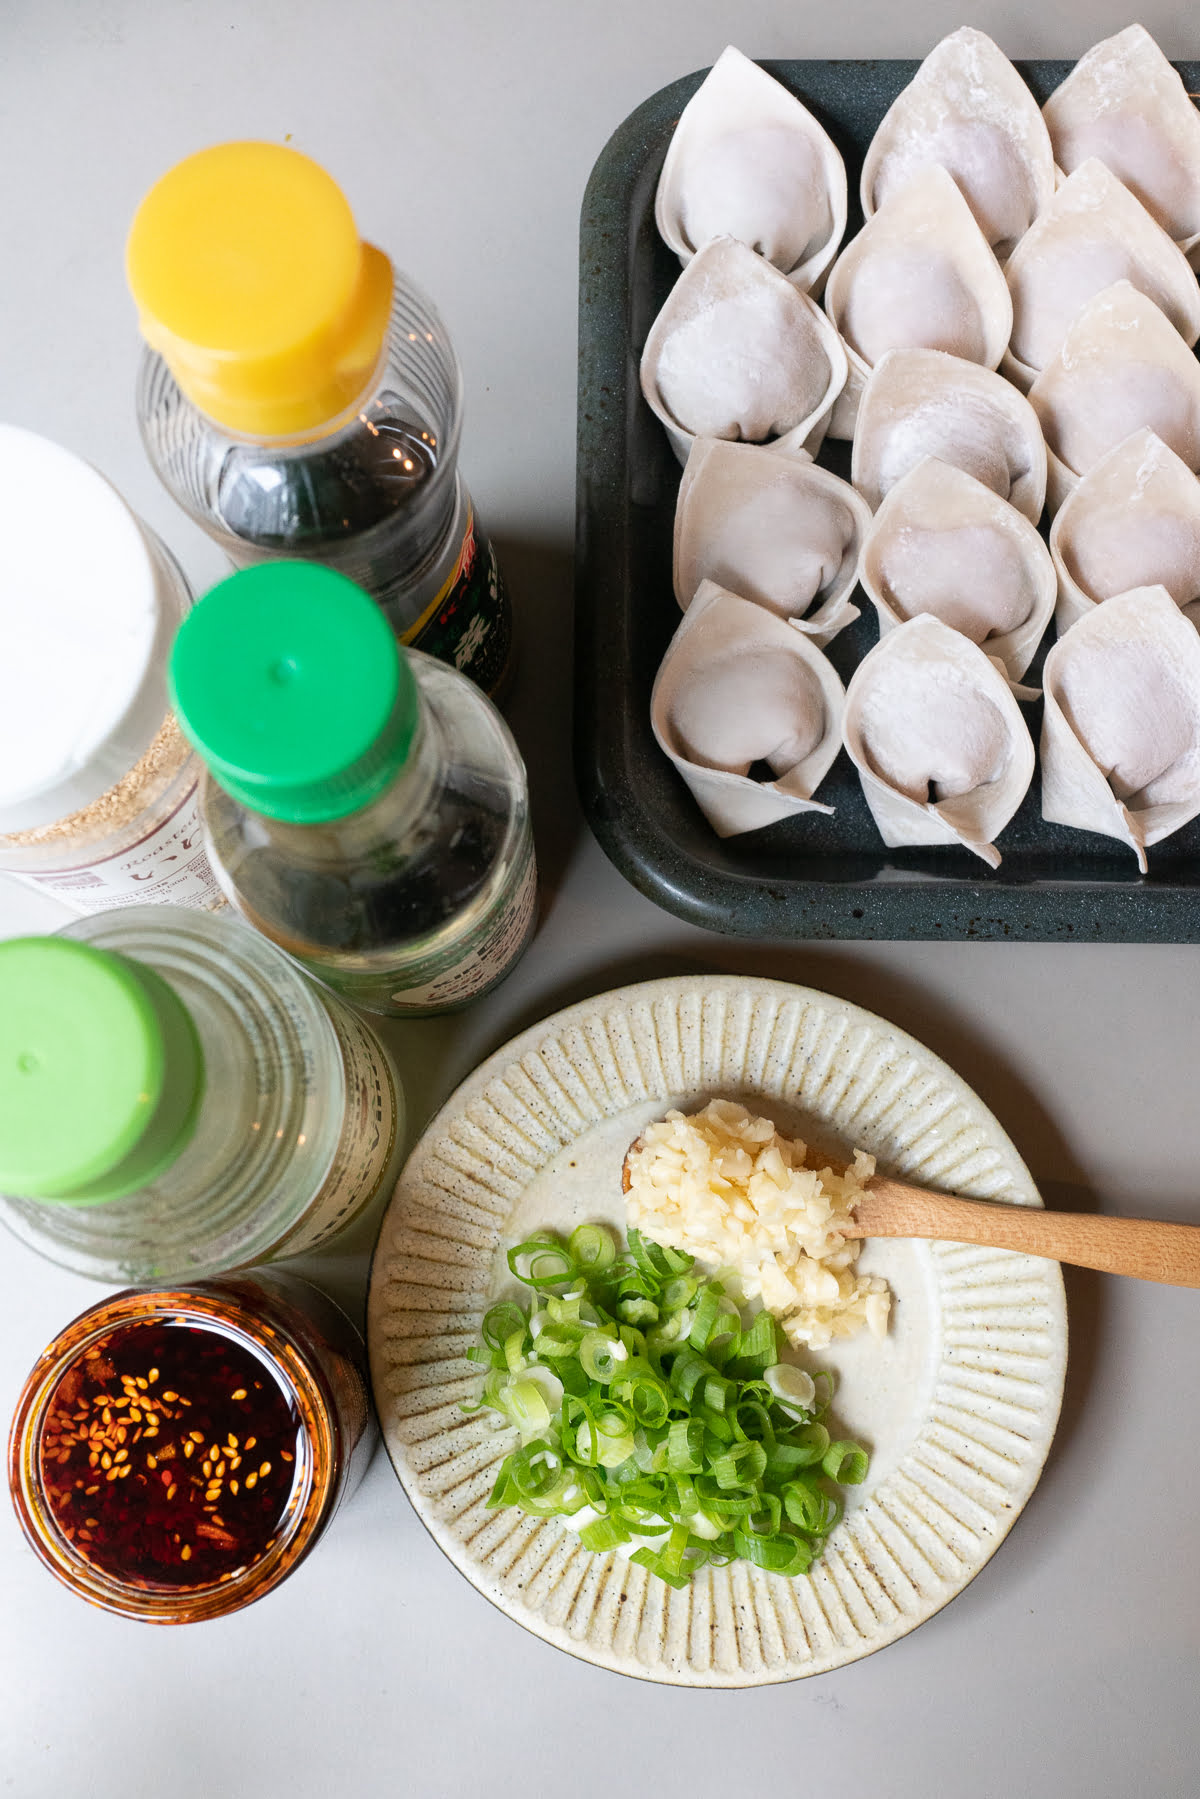 Ingredients for A plate of Szechuan Dumplings / Wontons on a table (wontons or dumplings, garlic, green onions, chili oil, soy sauce, rice vinegar, sesame oil, and sesame seeds).